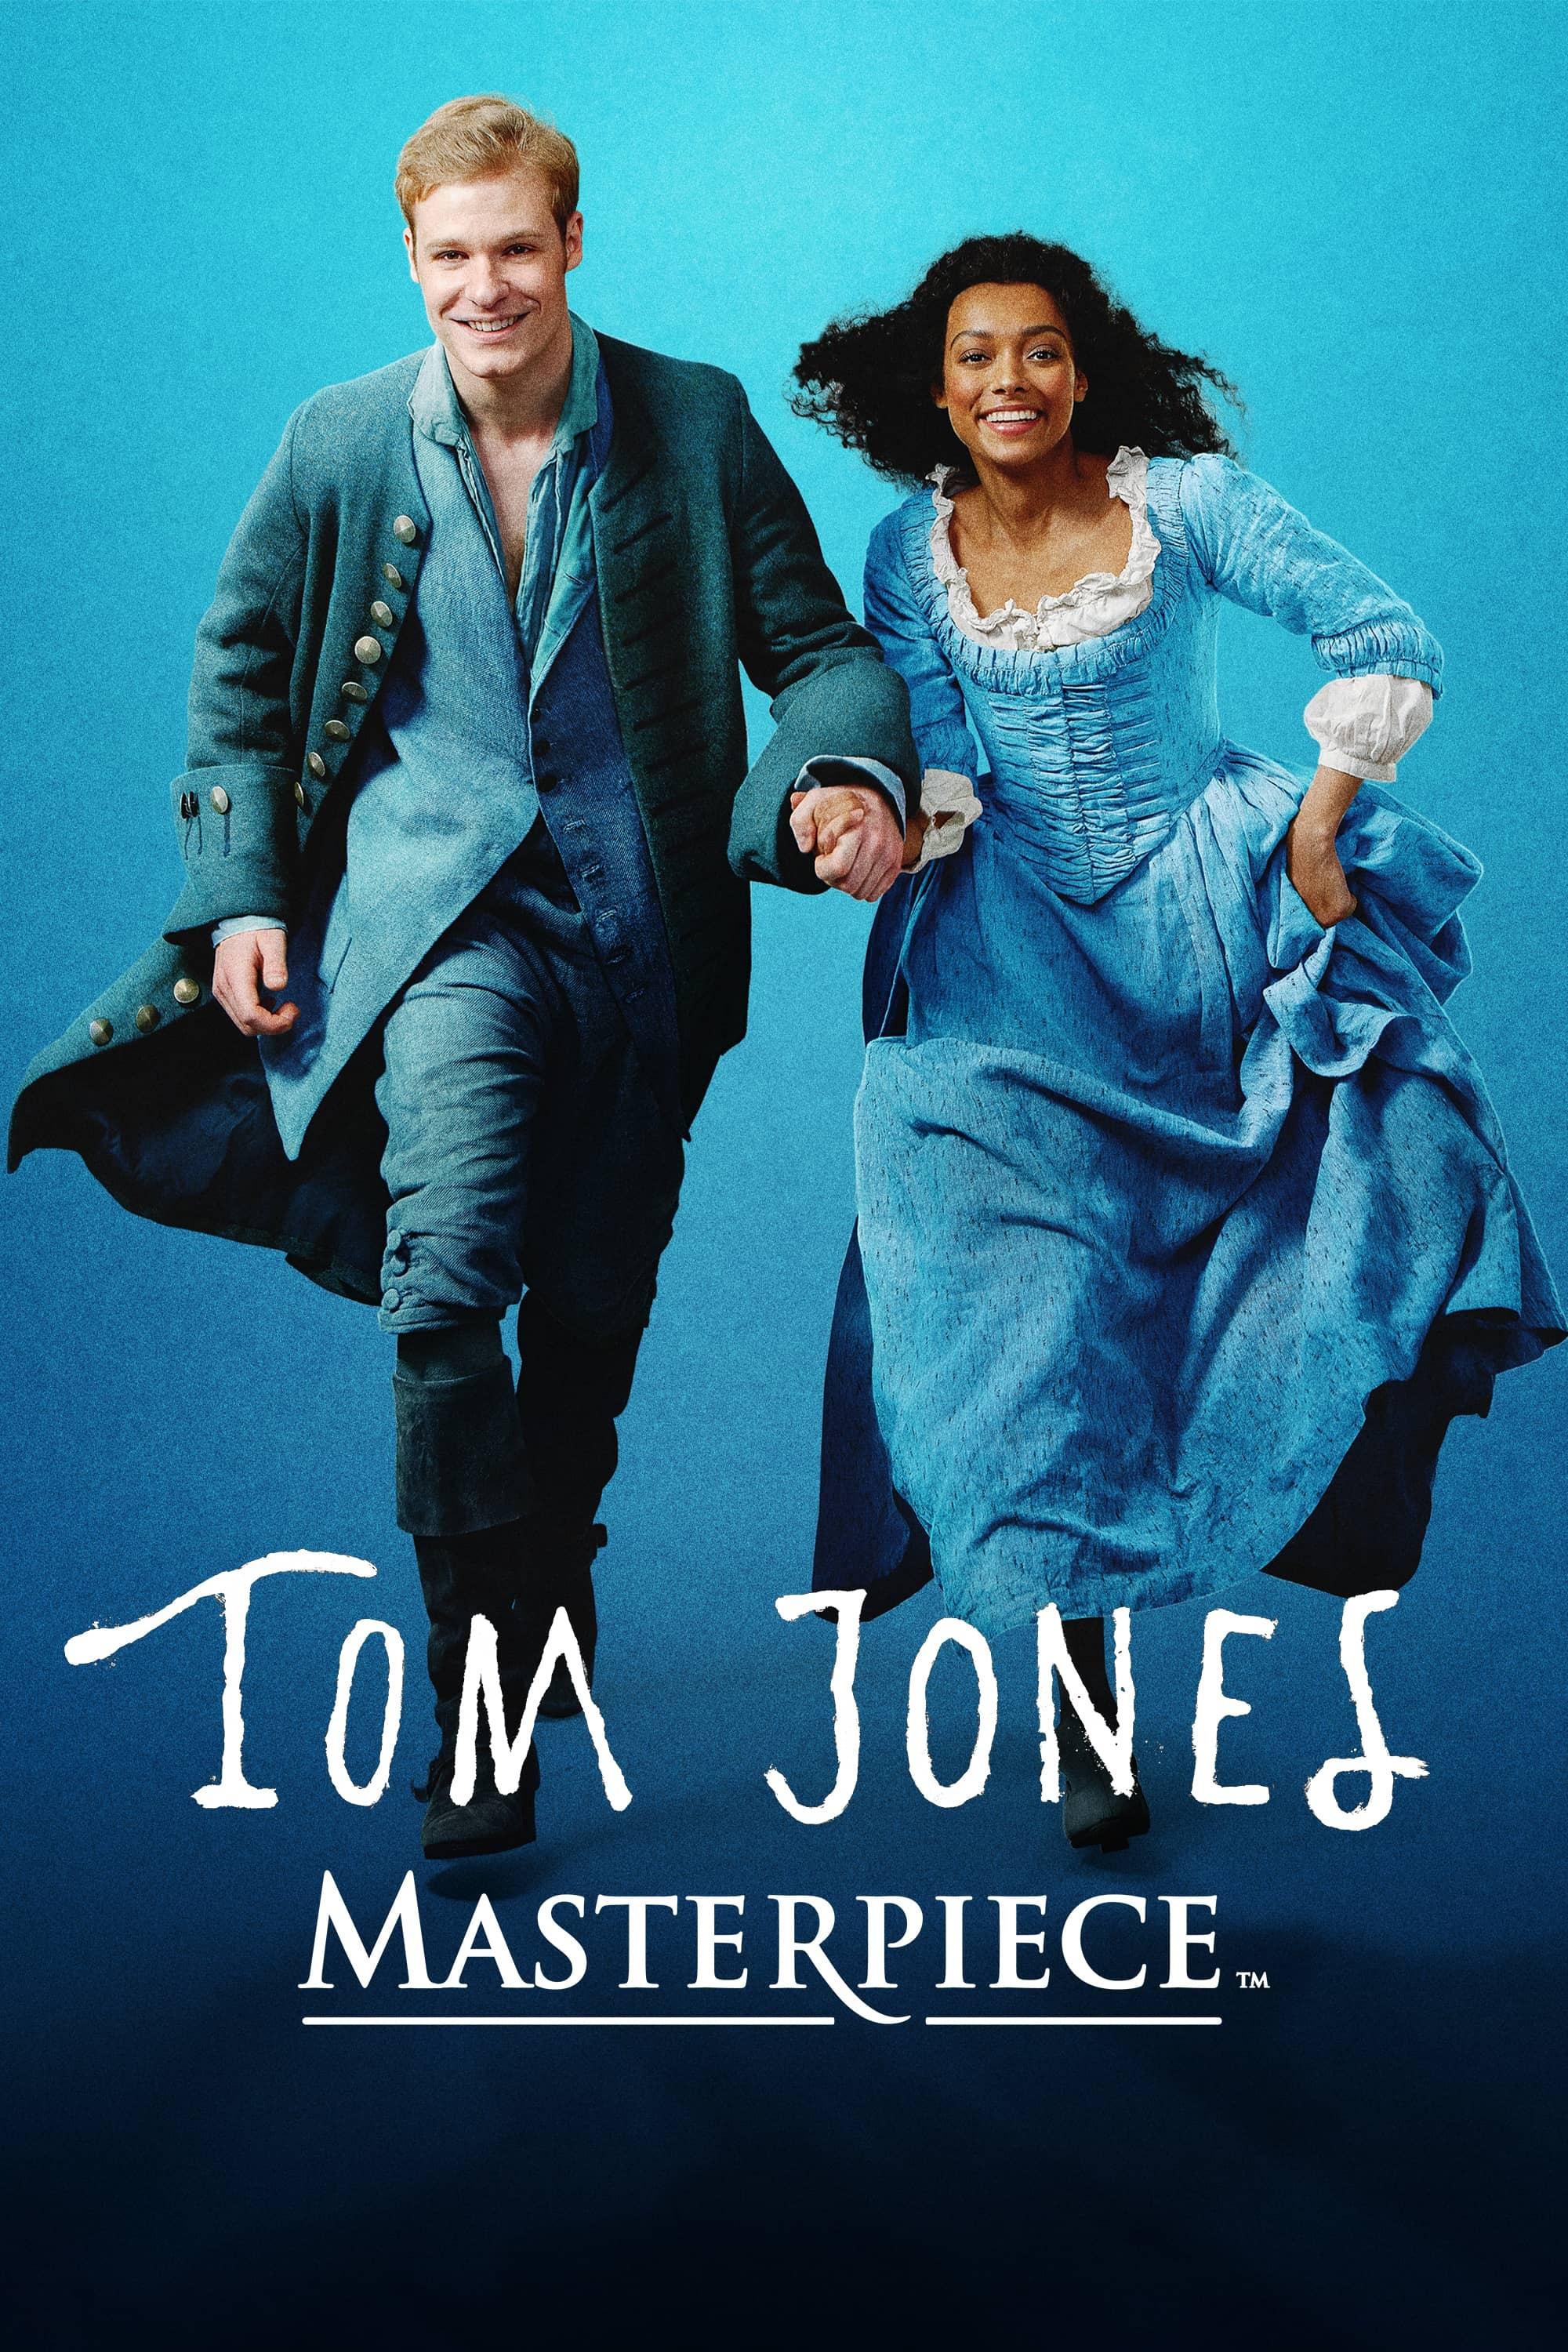 Solly McLeod and Sophie Wilde in Tom Jones promotional poster. Courtesy of PBS Masterpiece.